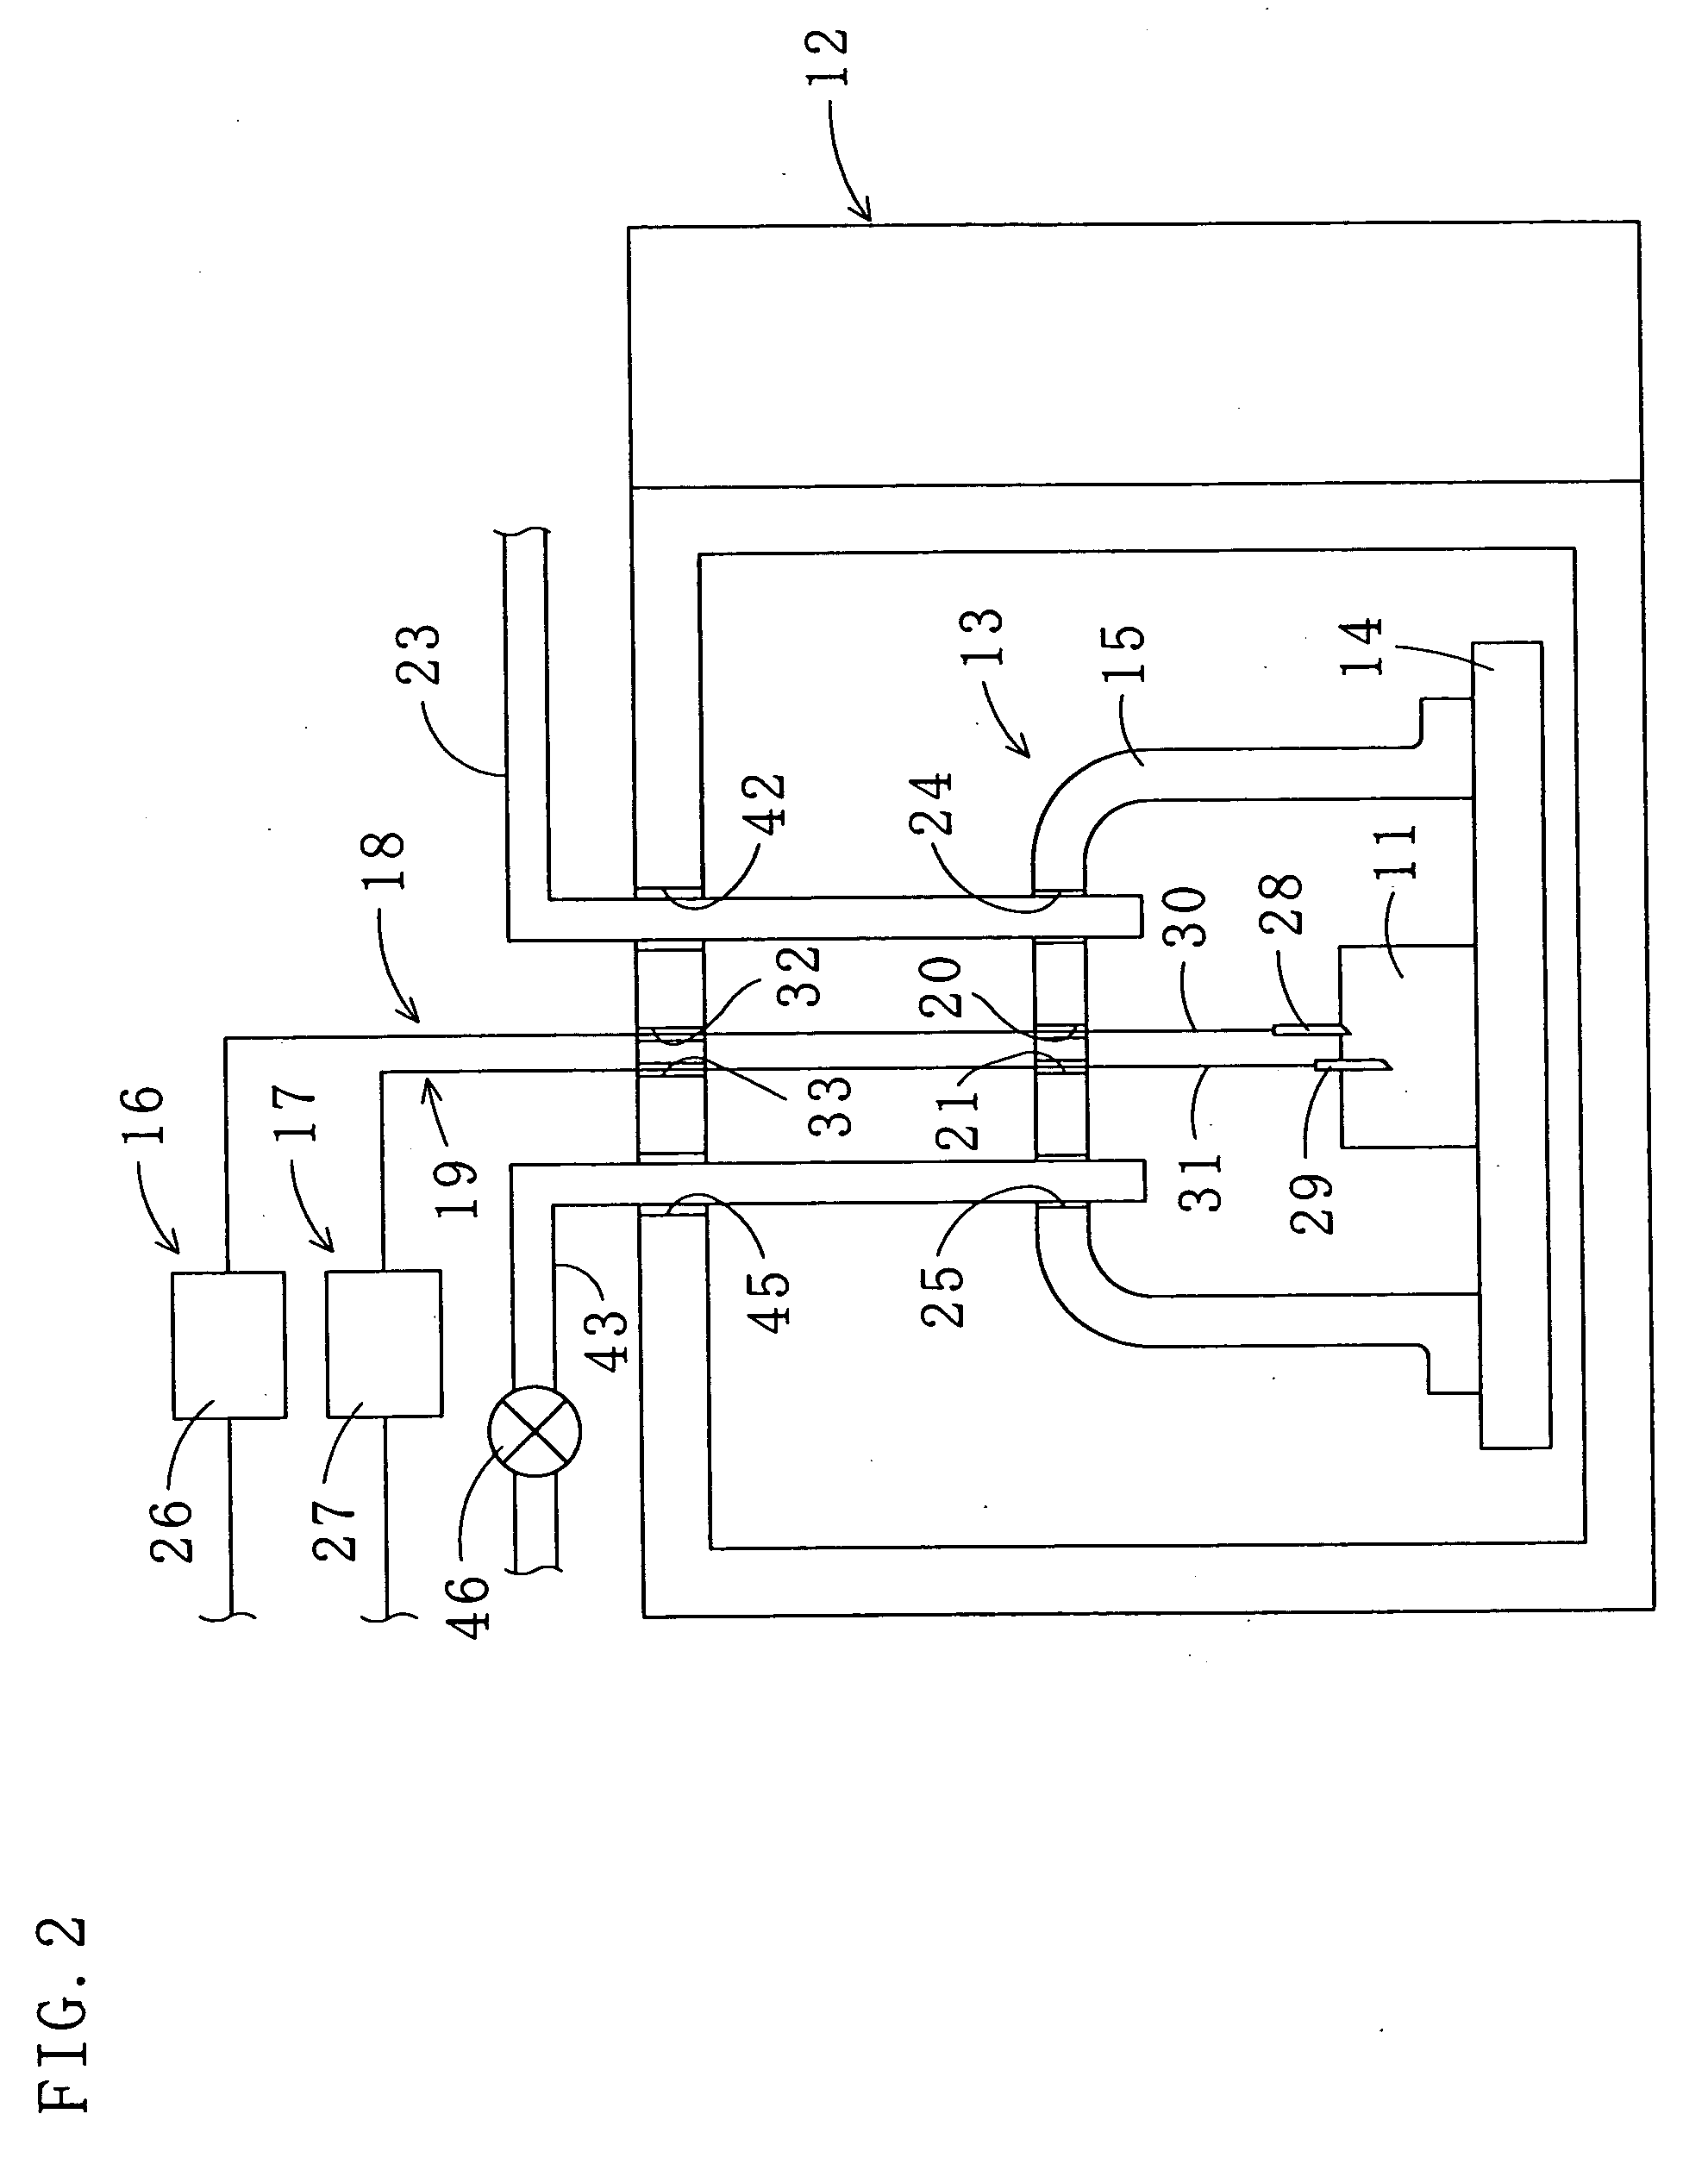 Method And Apparatus For Drying Under Reduced Pressure Using Microwaves